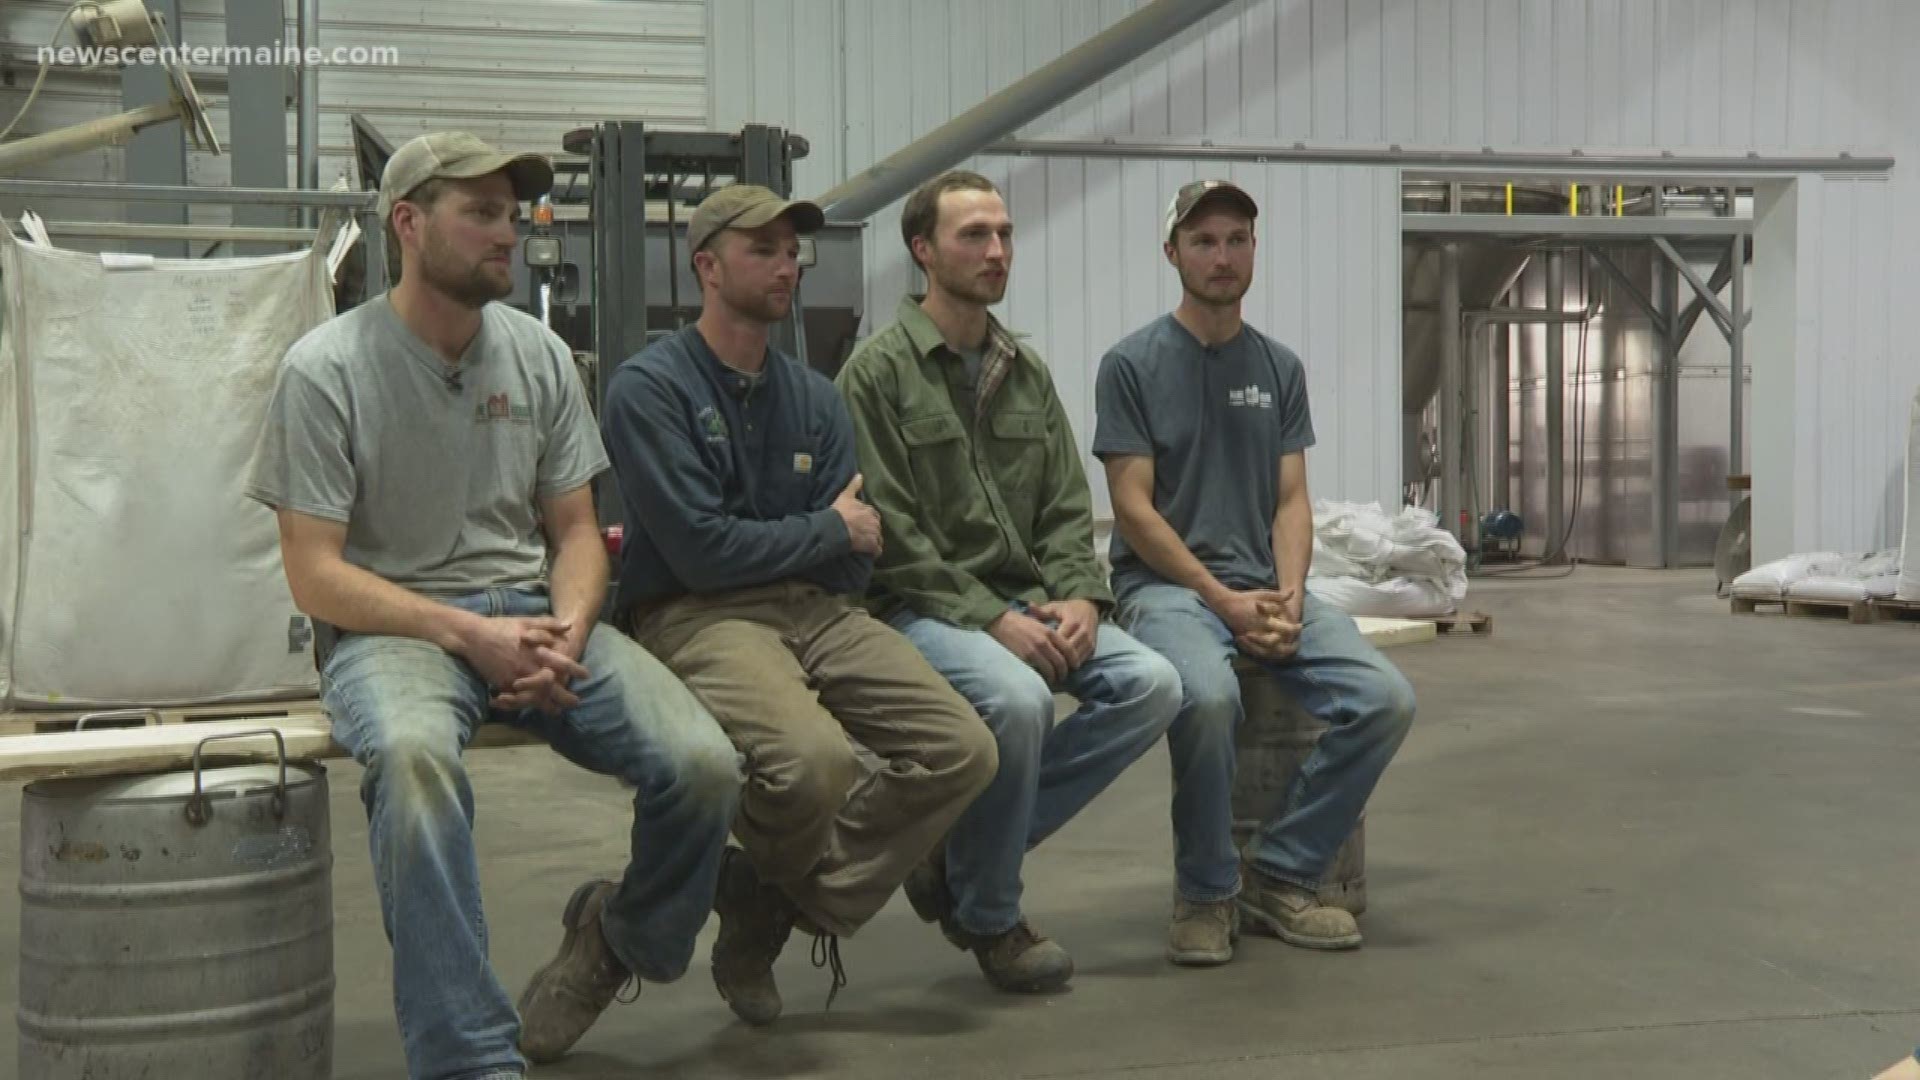 The Buck brothers wanted to come home to their families' land, but weren't sure how to expand the potato business. Instead, they picked up a beer and a new business.